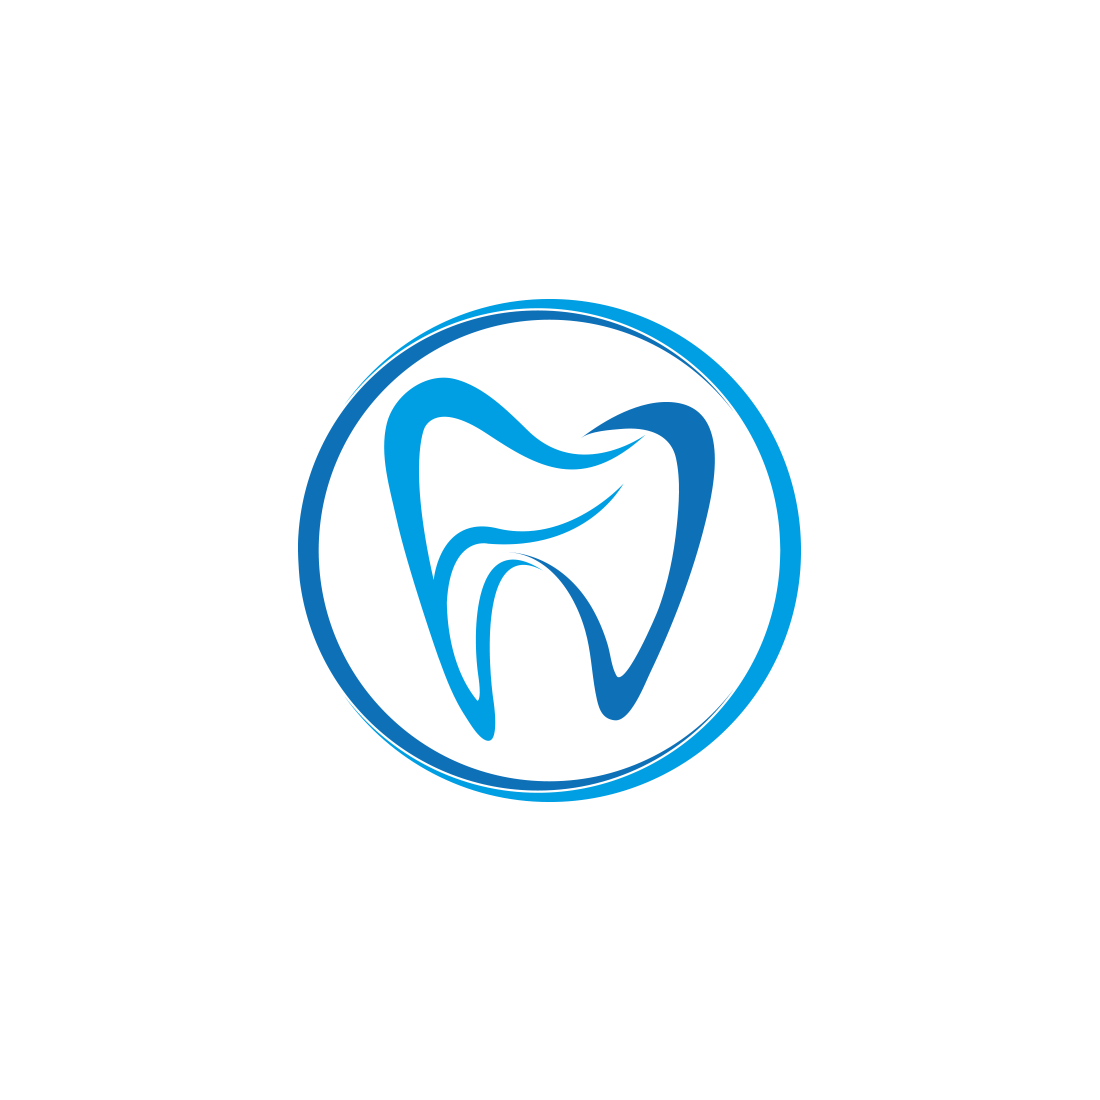 Dentist Tooth Logo Design Template cover image.